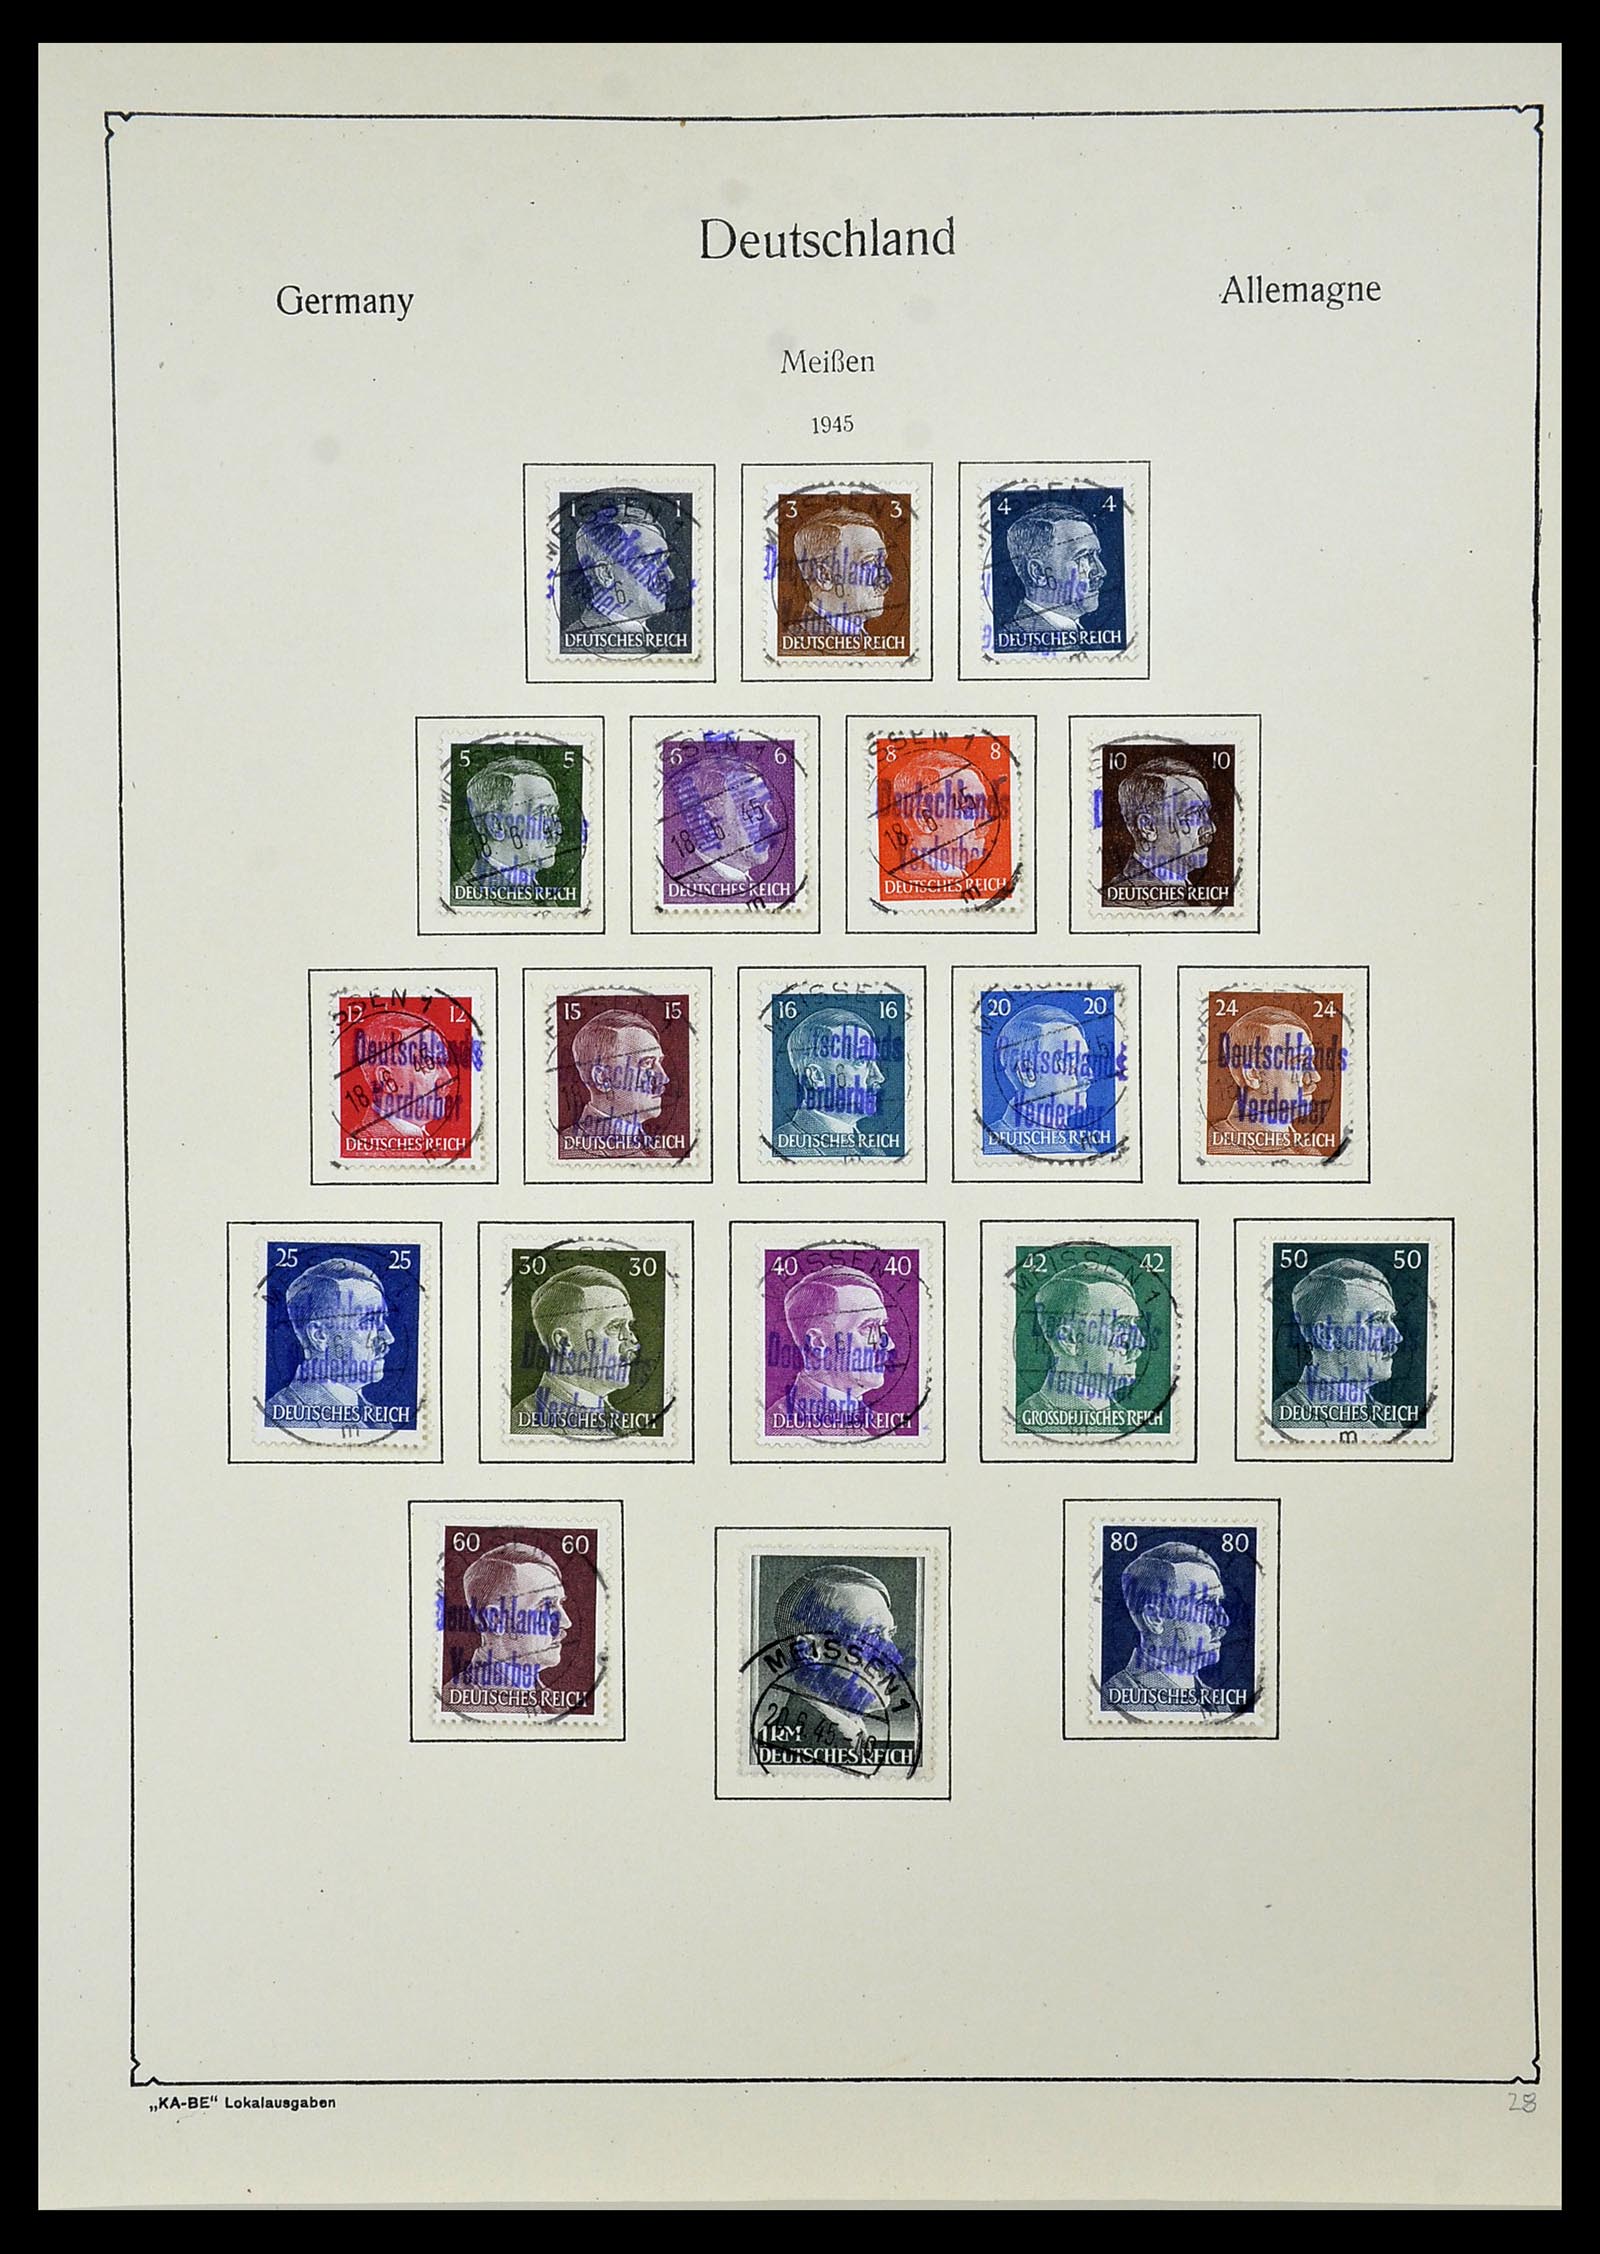 34162 029 - Stamp collection 34162 Germany local issues 1945-1946.